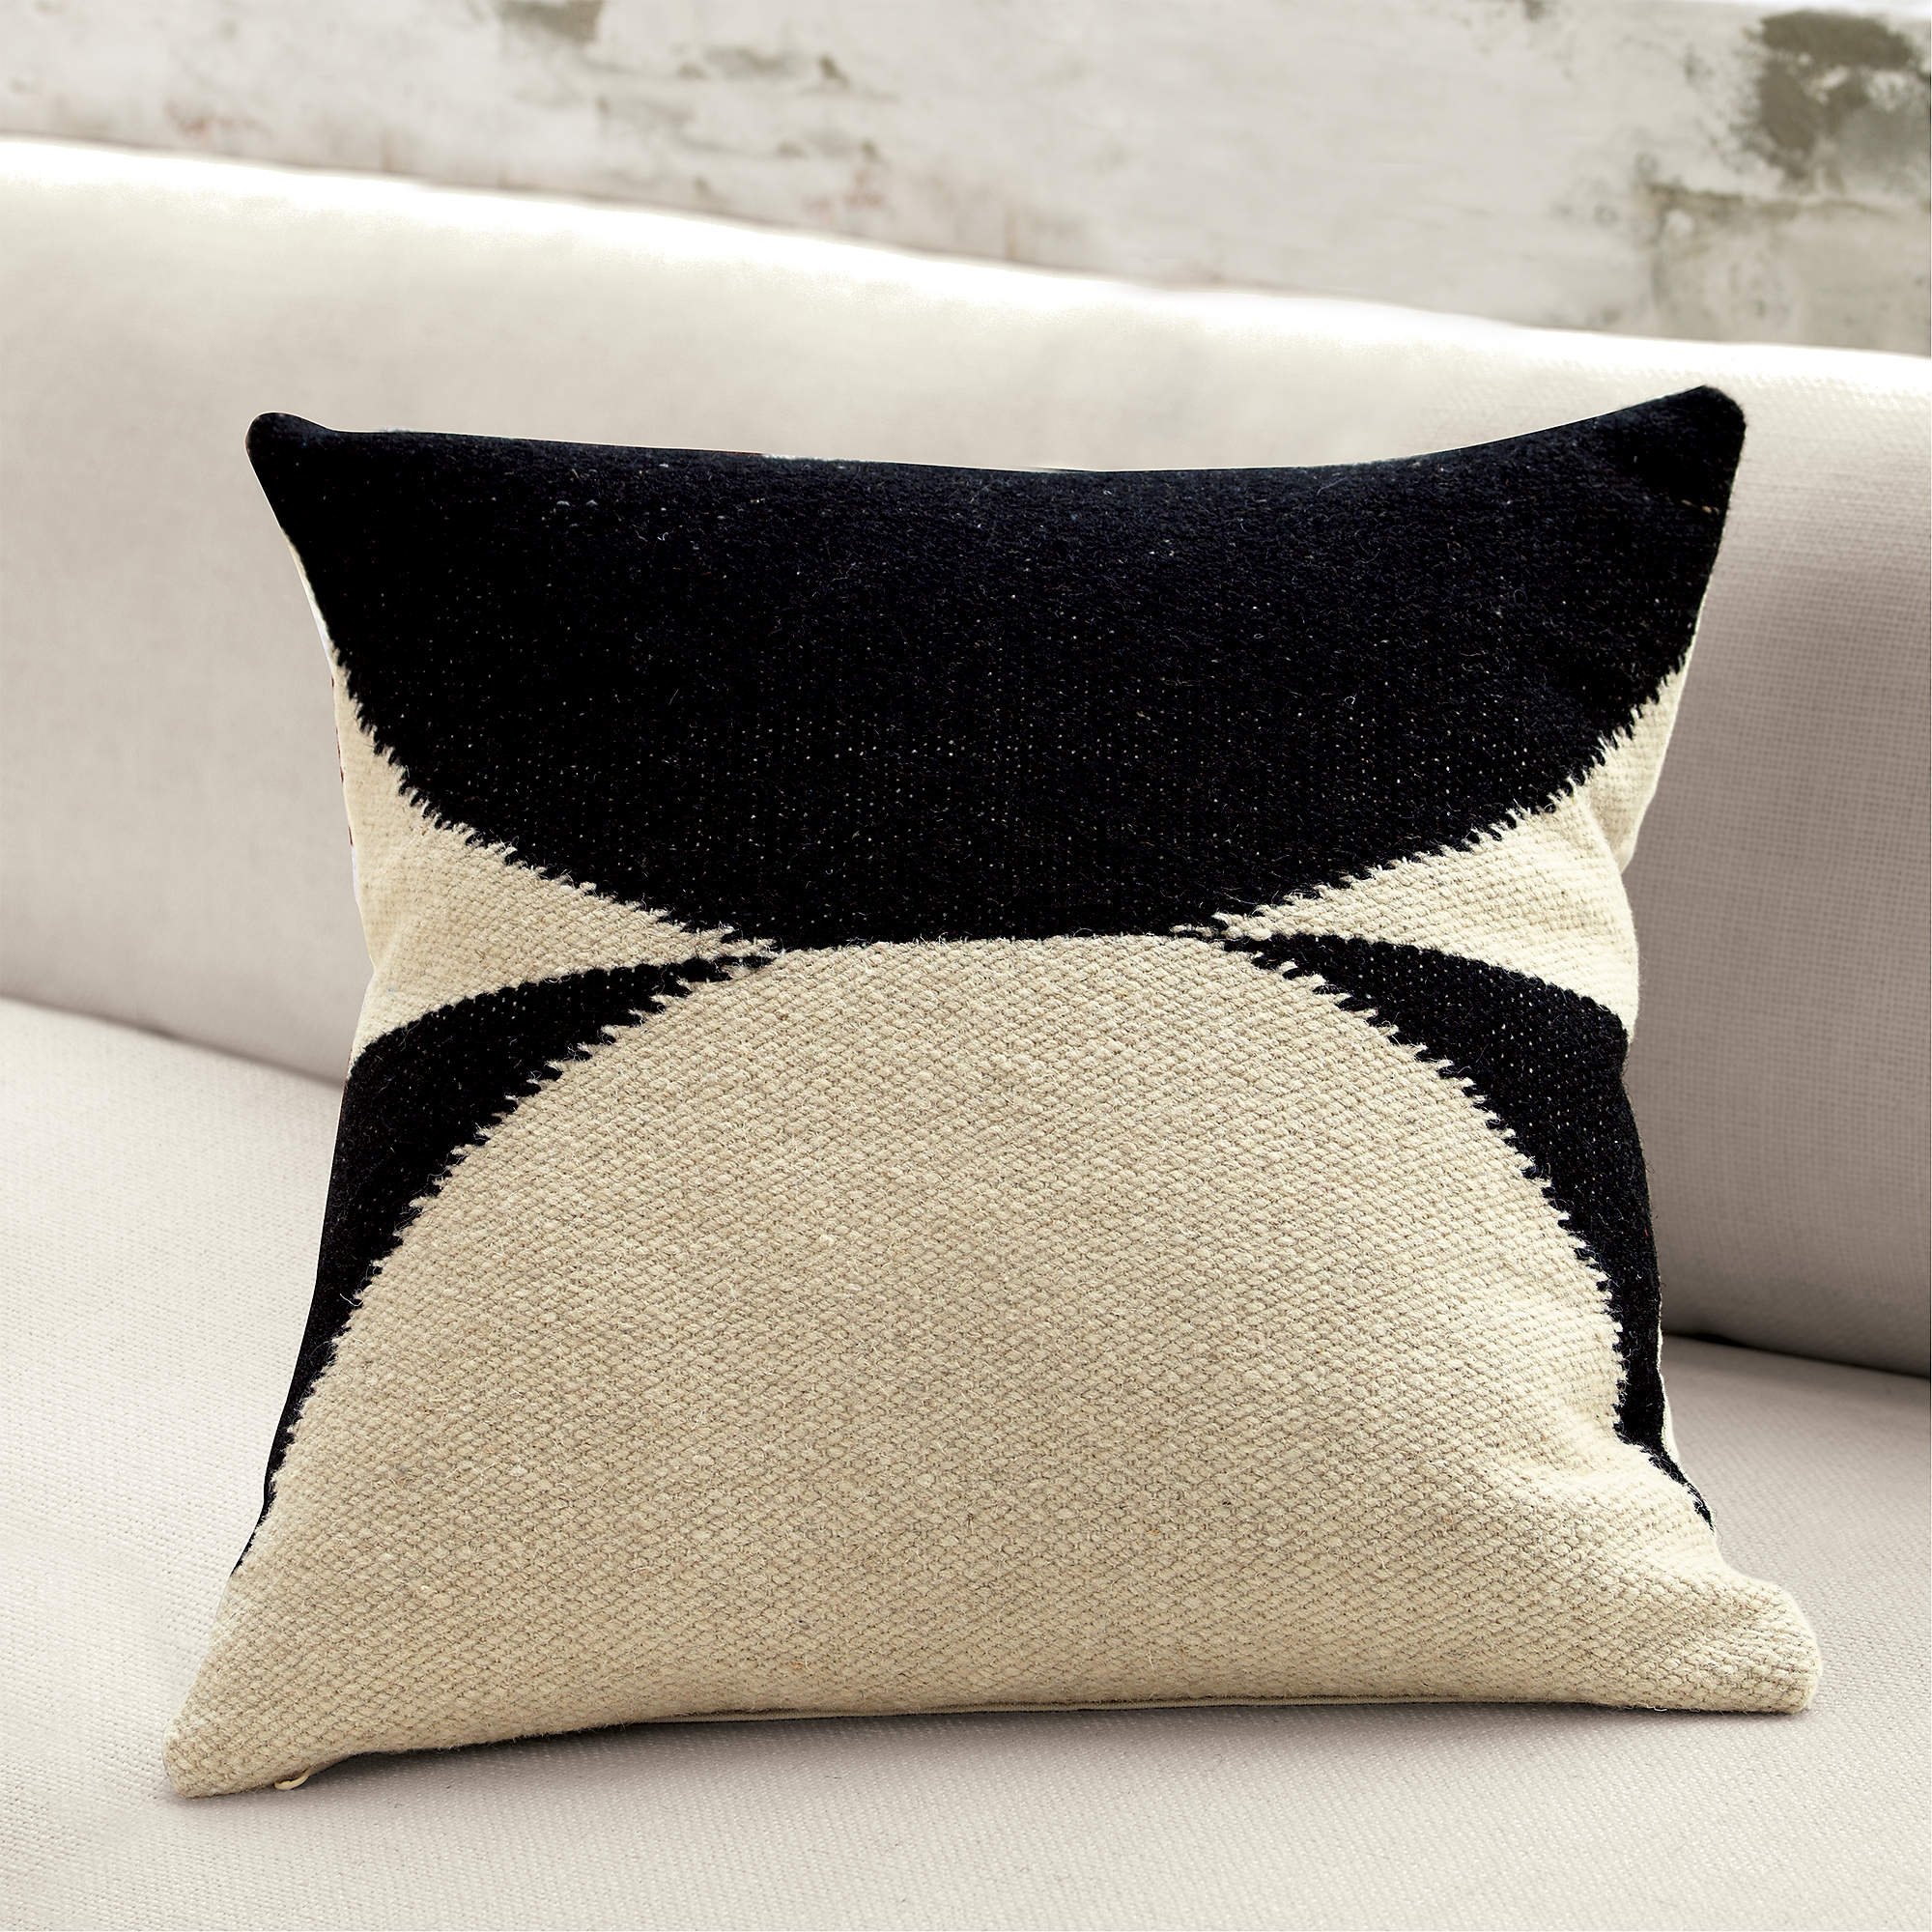 Reflect Pillow with Down-Alternative Insert, 20" x 20" - Image 1